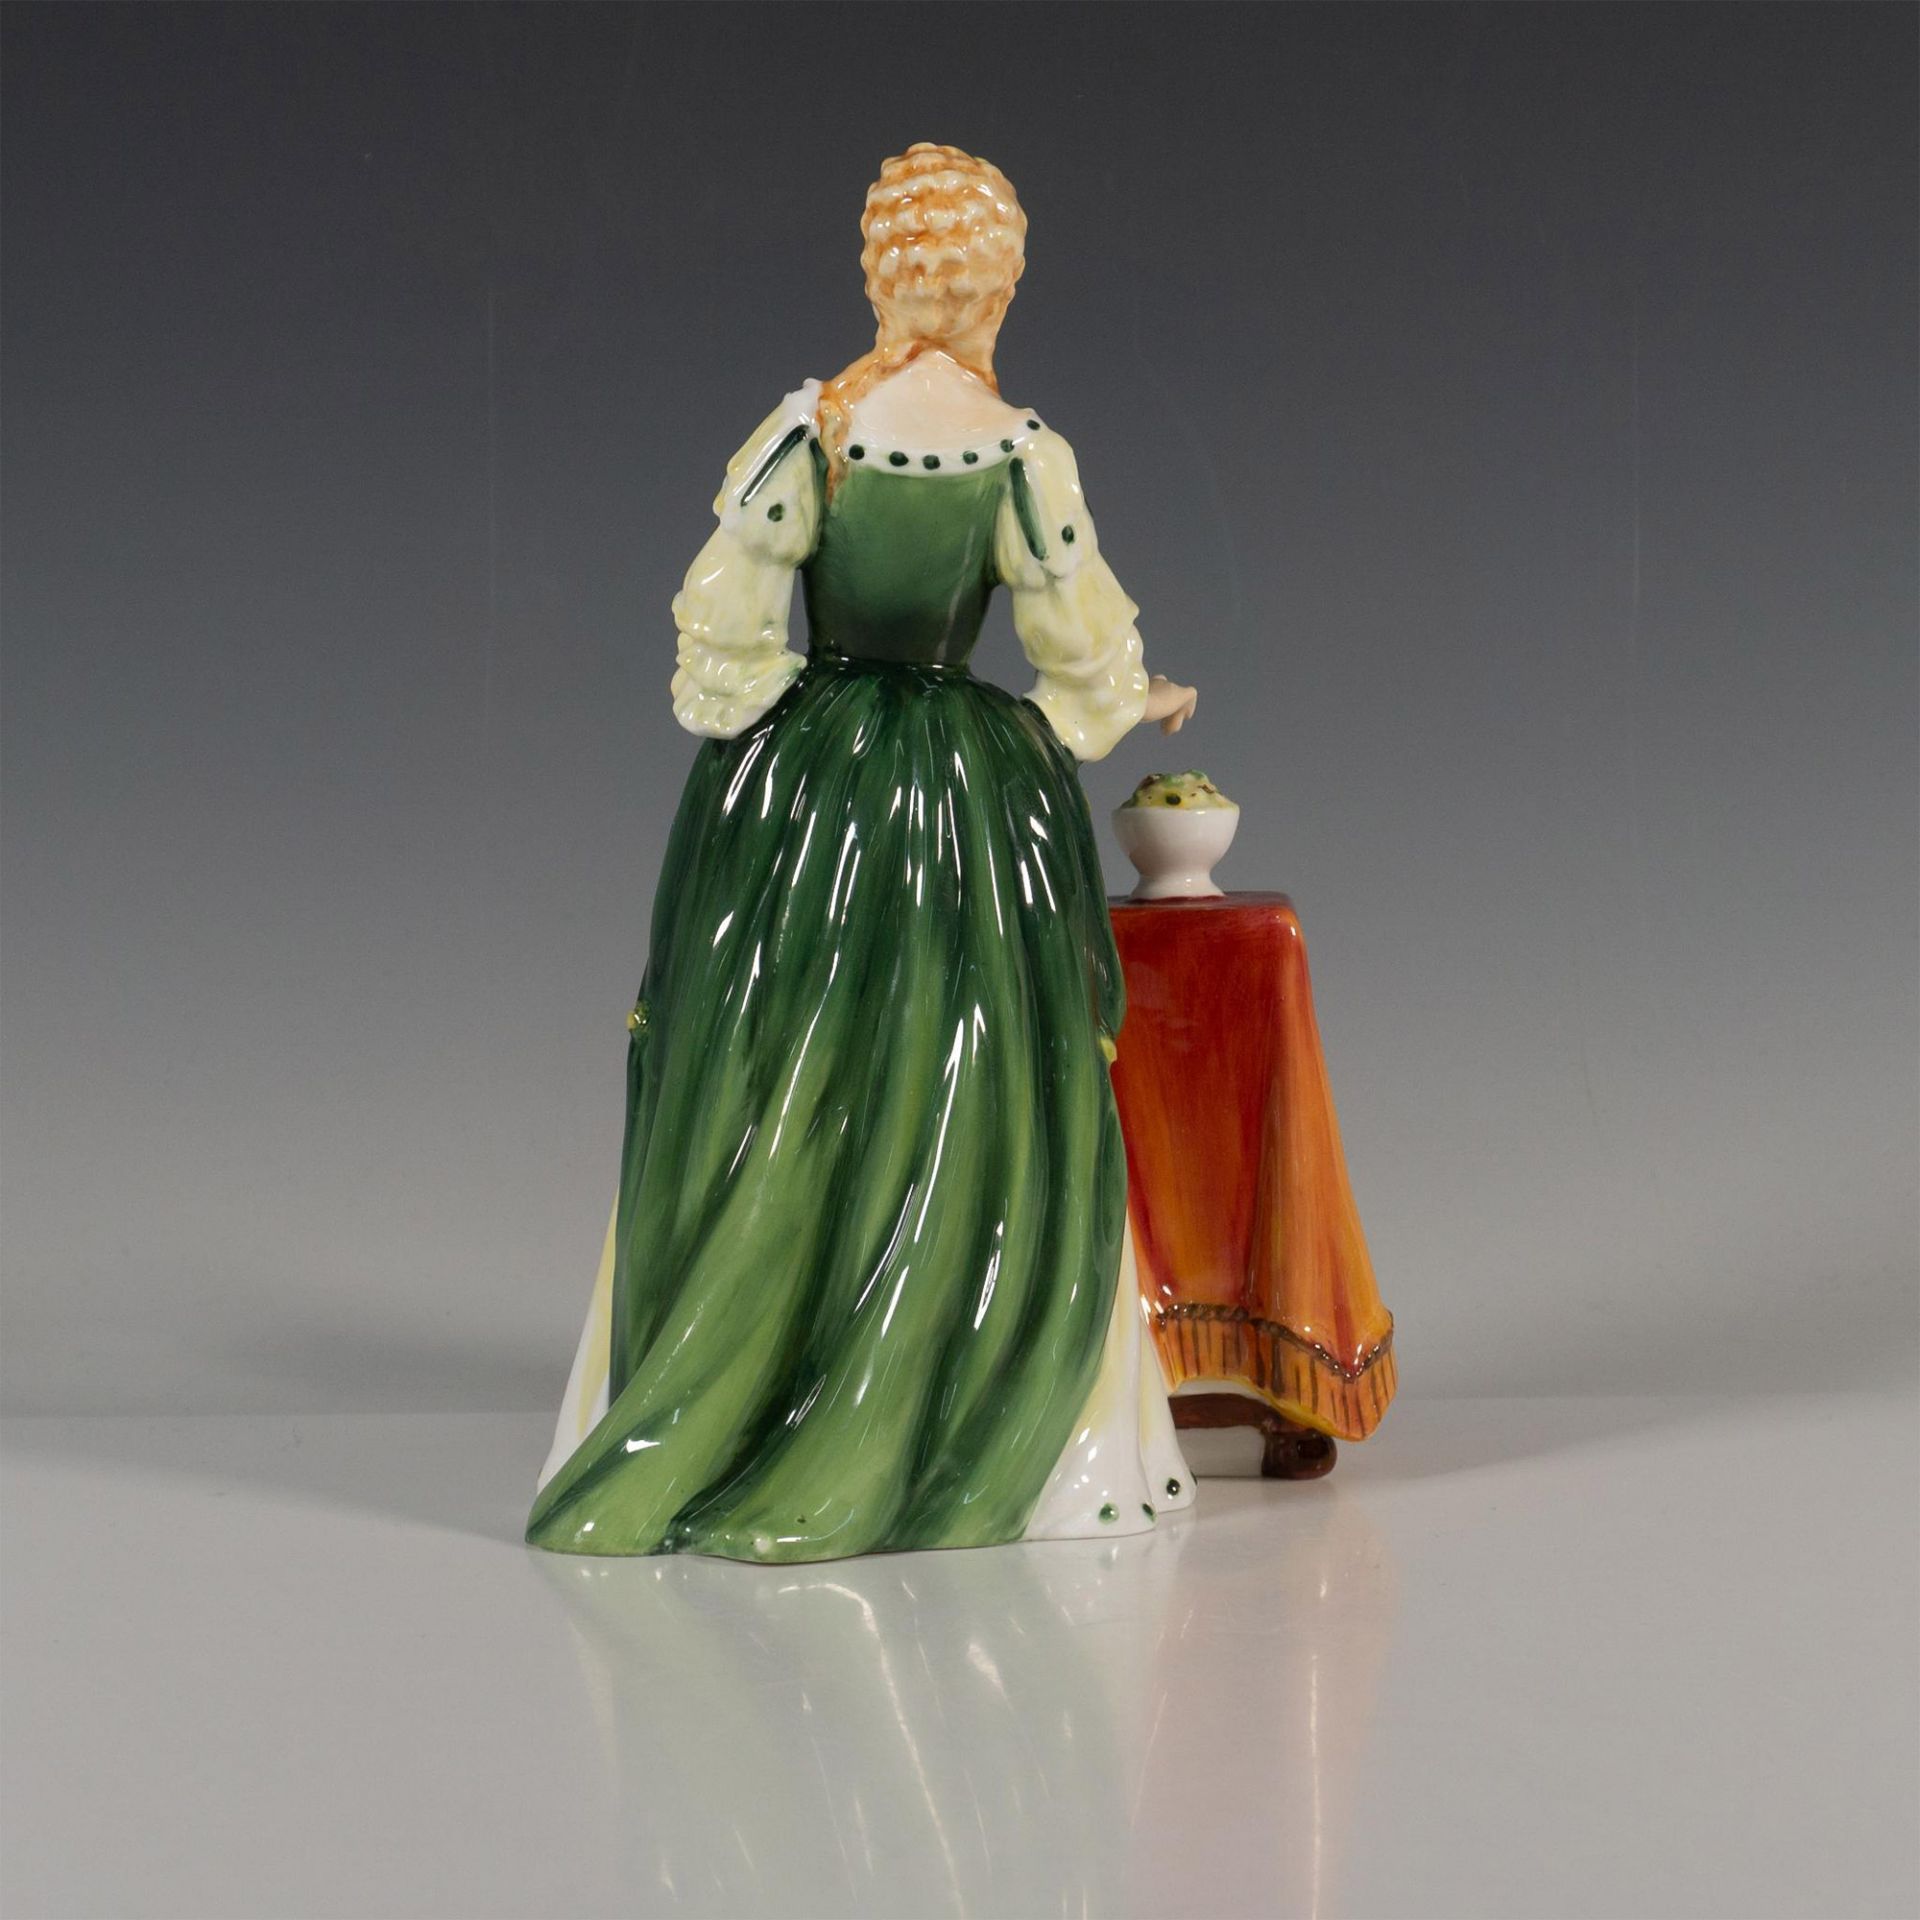 Queen Mary II HN4474 Prototype - Royal Doulton Figurine - Image 4 of 5